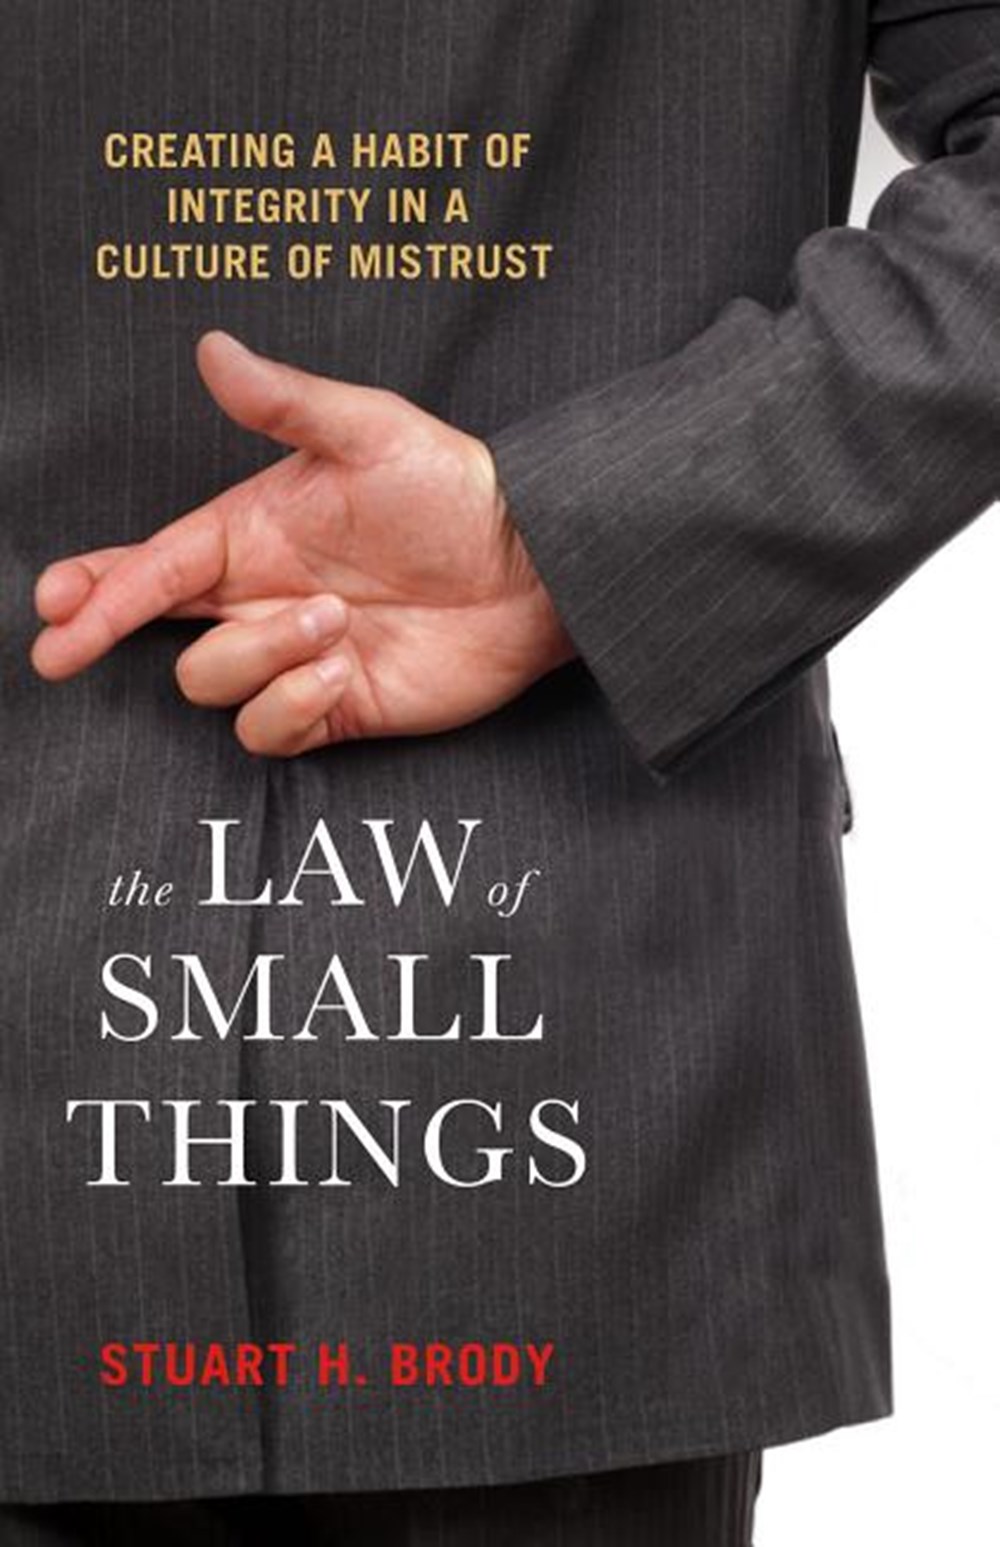 Law of Small Things: Creating a Habit of Integrity in a Culture of Mistrust